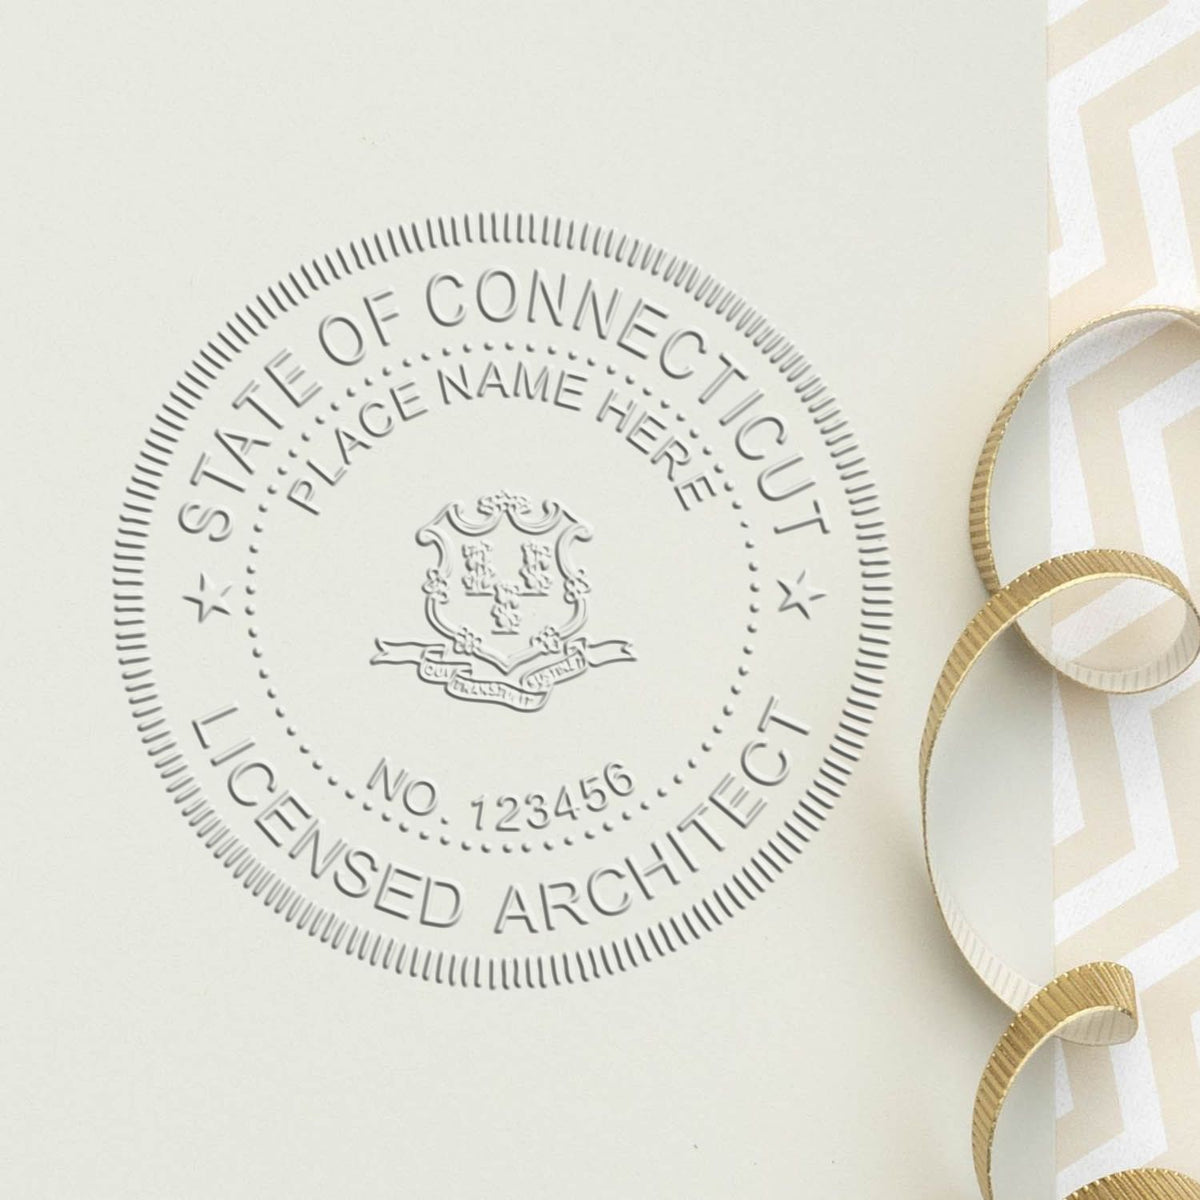 The State of Connecticut Long Reach Architectural Embossing Seal stamp impression comes to life with a crisp, detailed photo on paper - showcasing true professional quality.